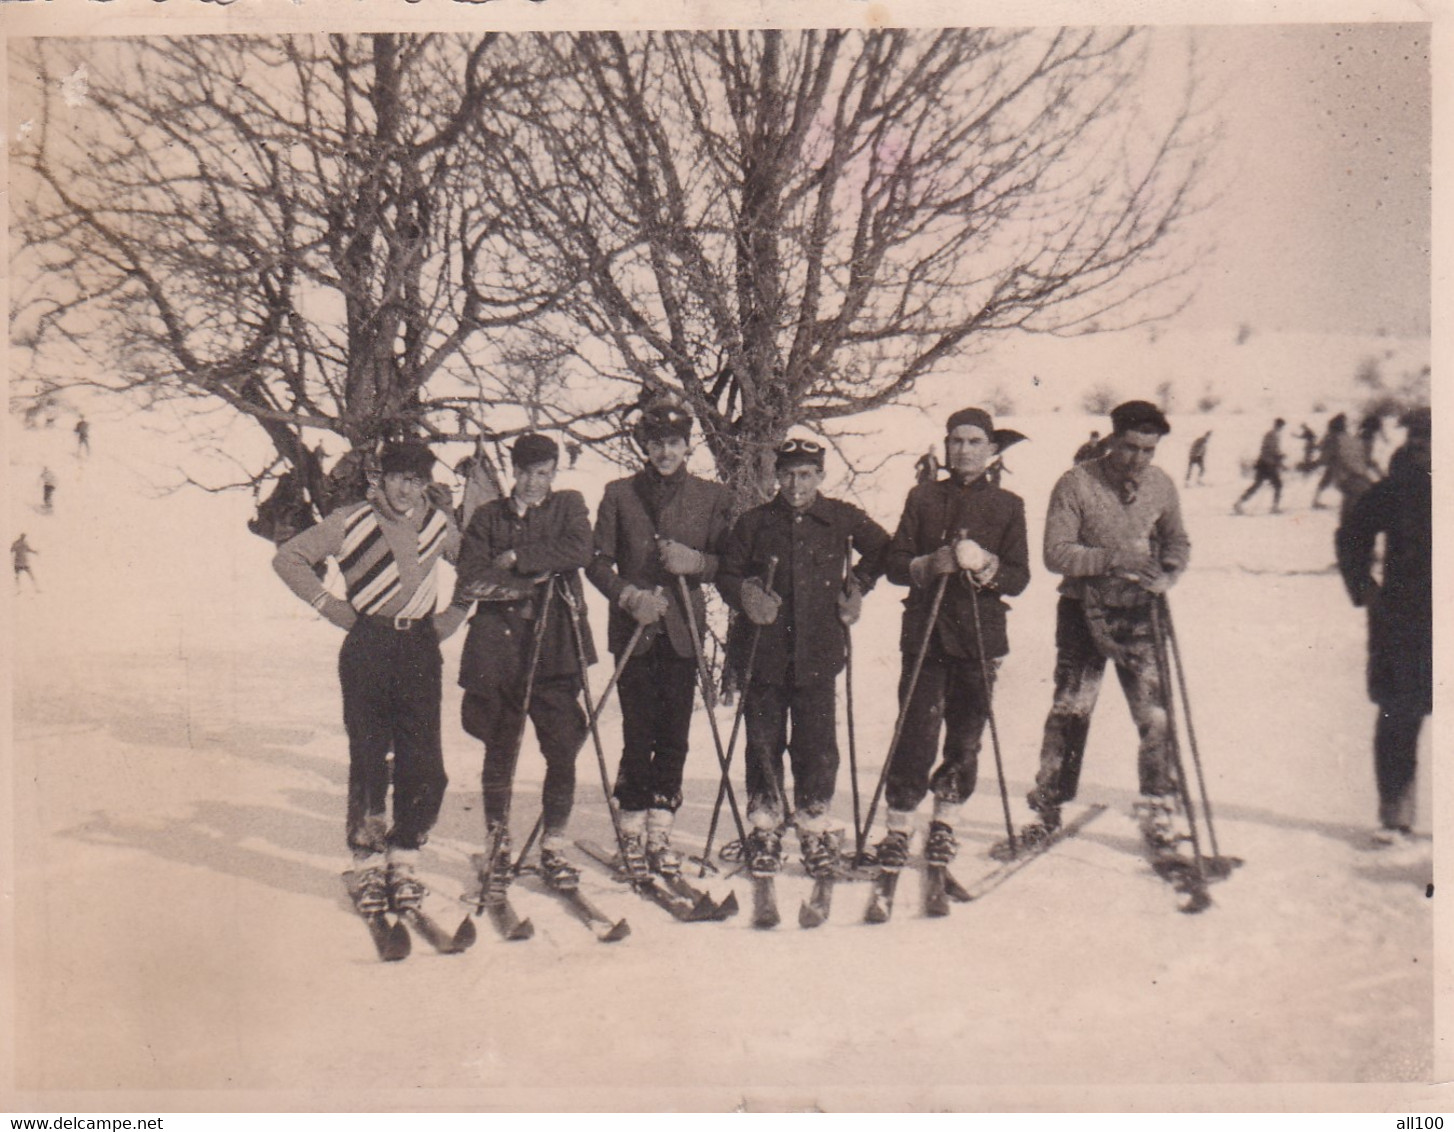 A17459 - ILLUSTRATION OF WINTER SPORT PEOPLE ON SKIING POSTCARD UNUSED - Sports D'hiver